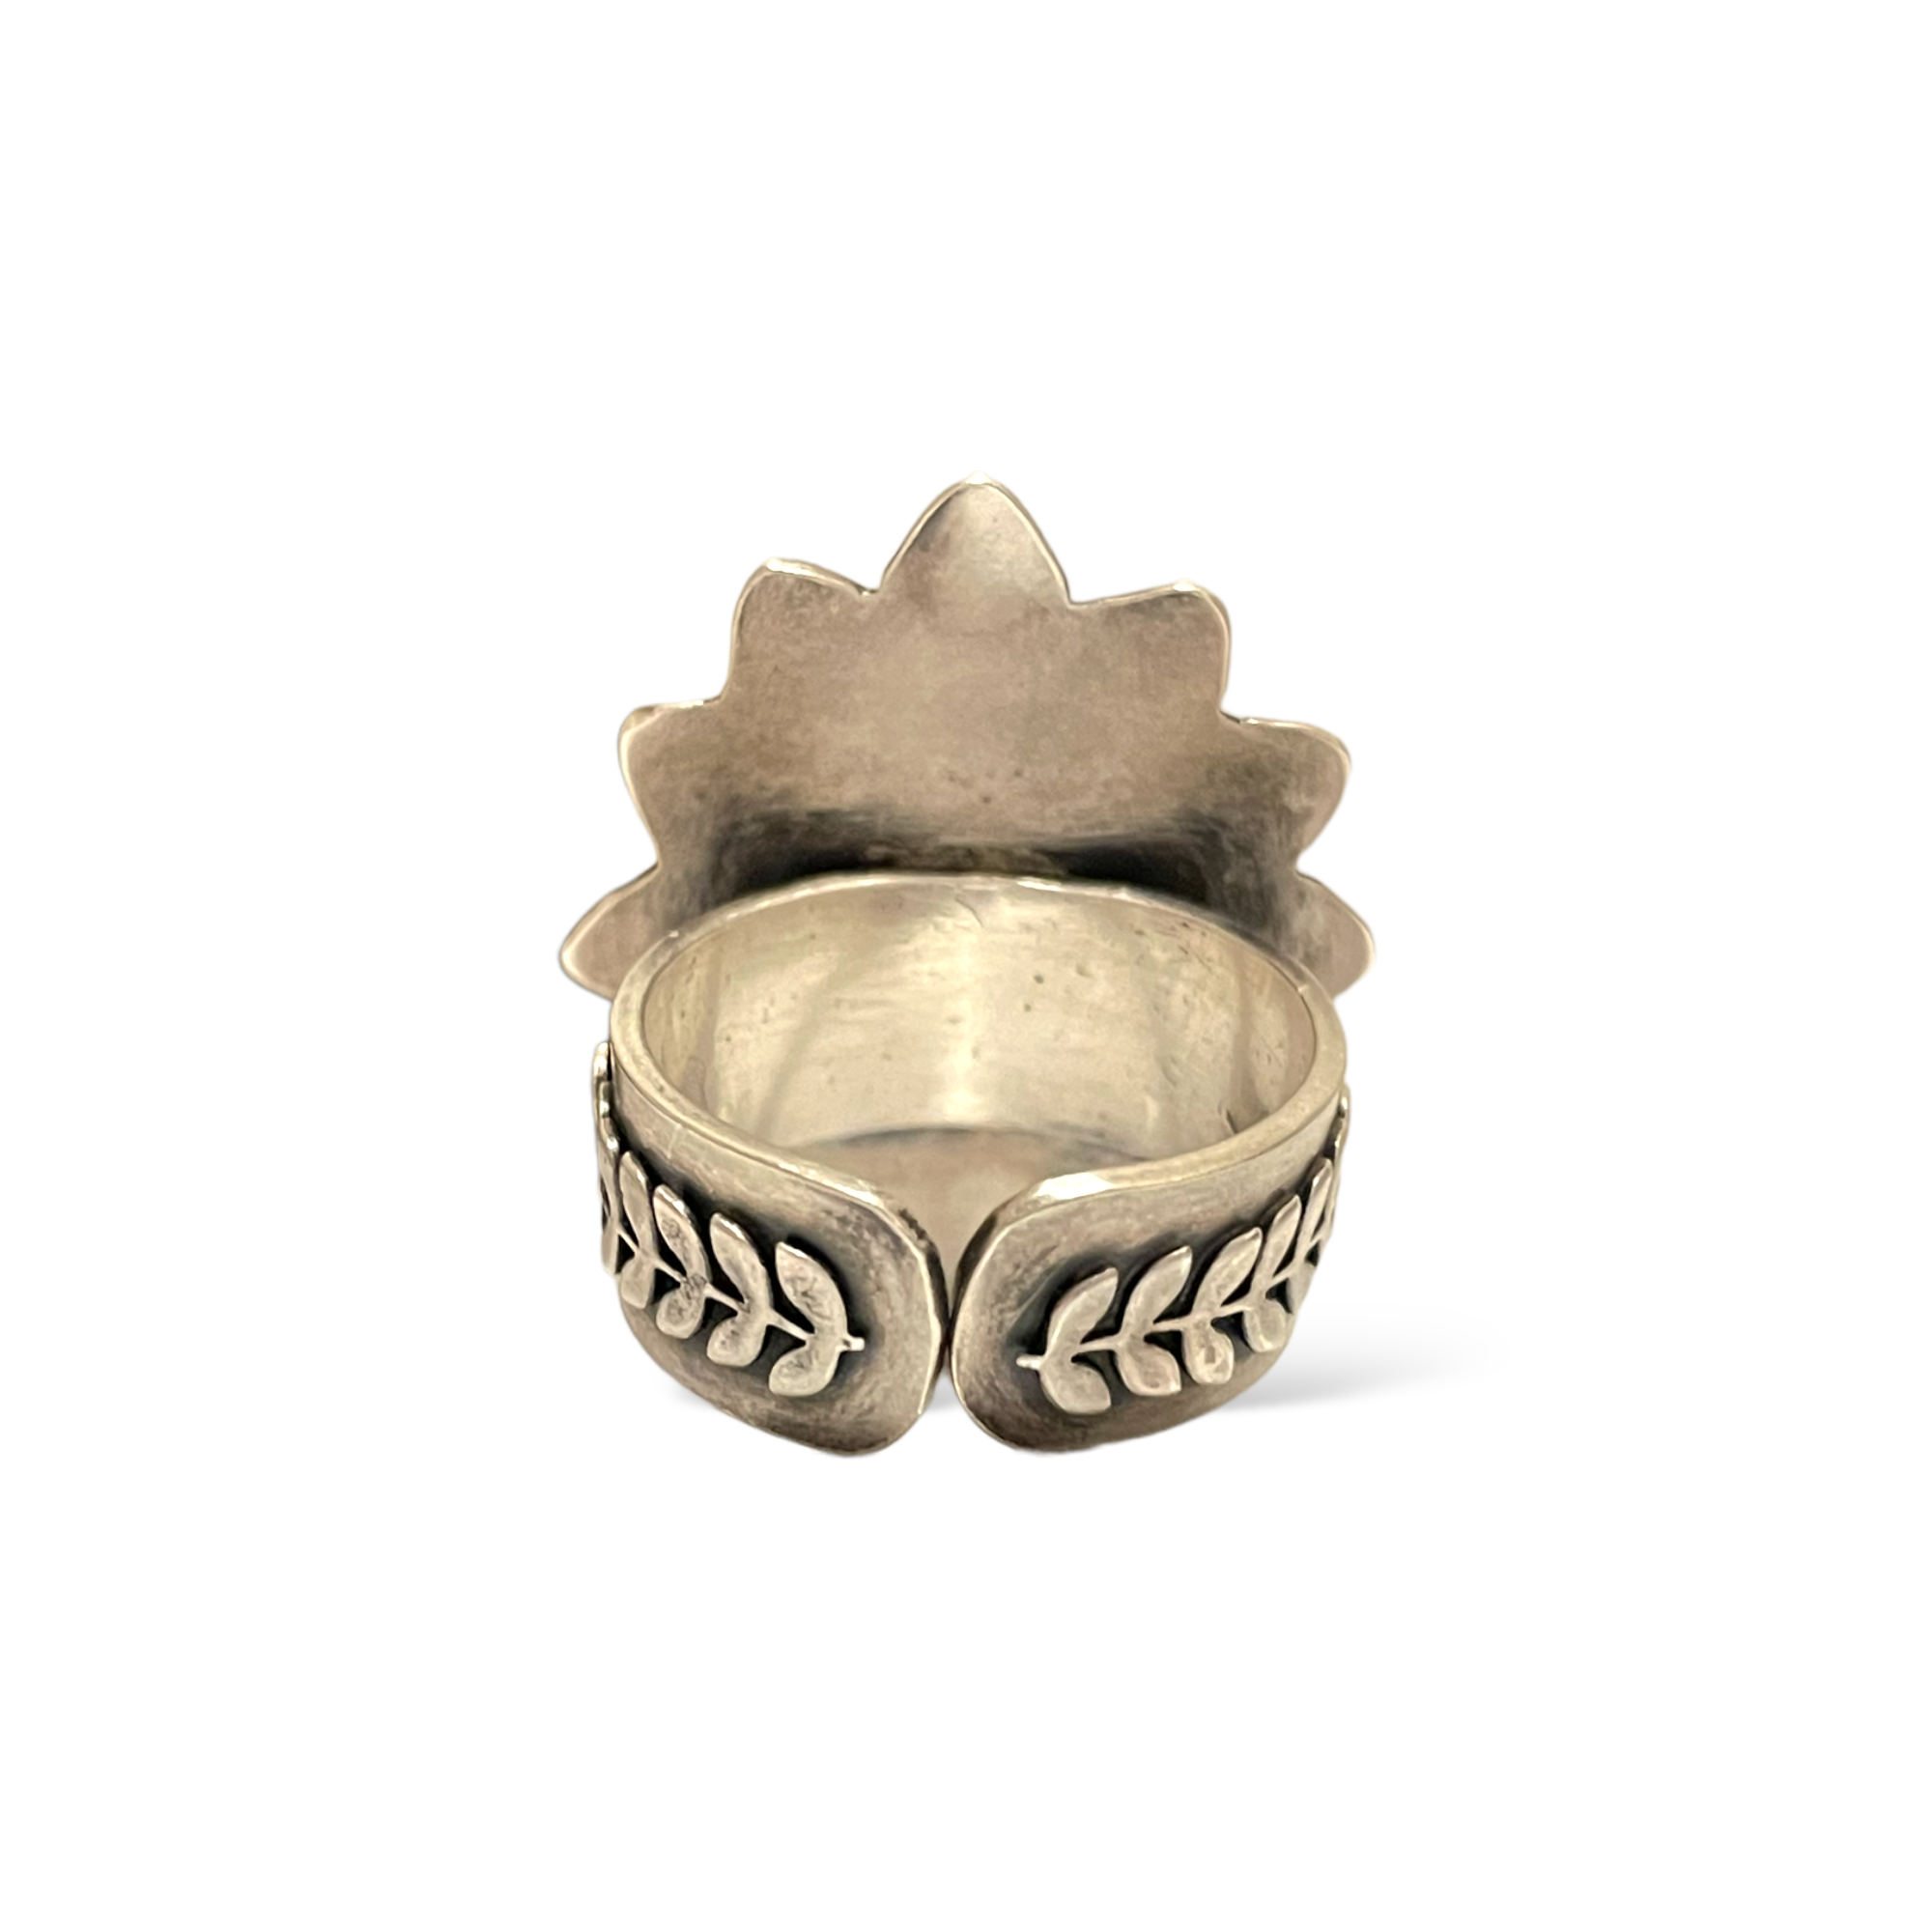 Custom Made Sterling Silver Art Deco Statement Ring |Size: Adjustable|